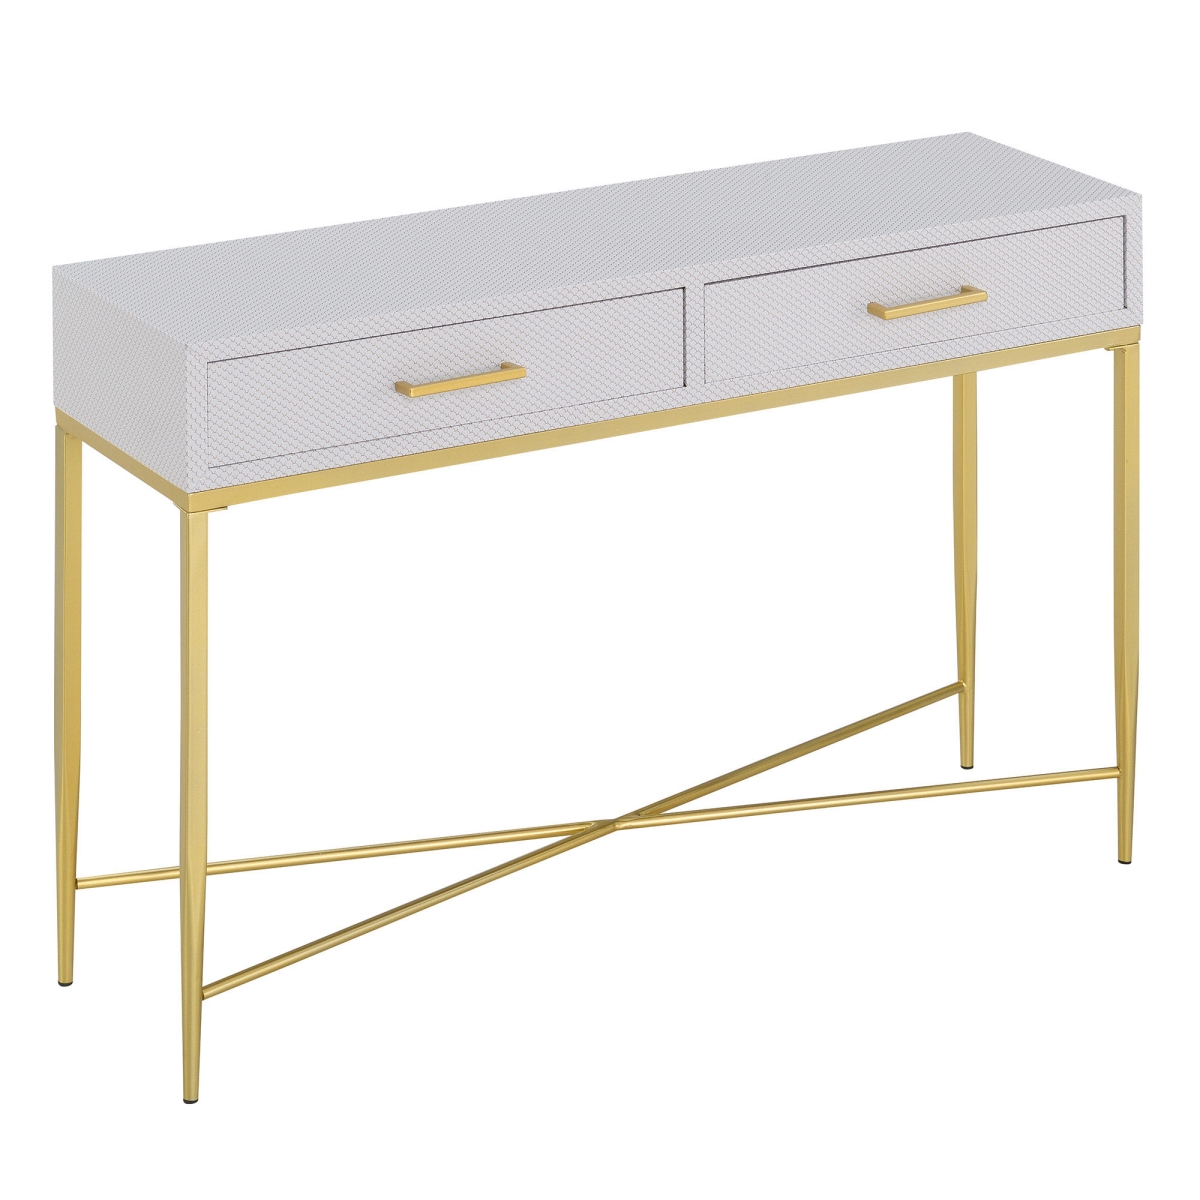 413189wsp 42 X 12 X 30 In. Ashley Console Table, White Scallop & Gold